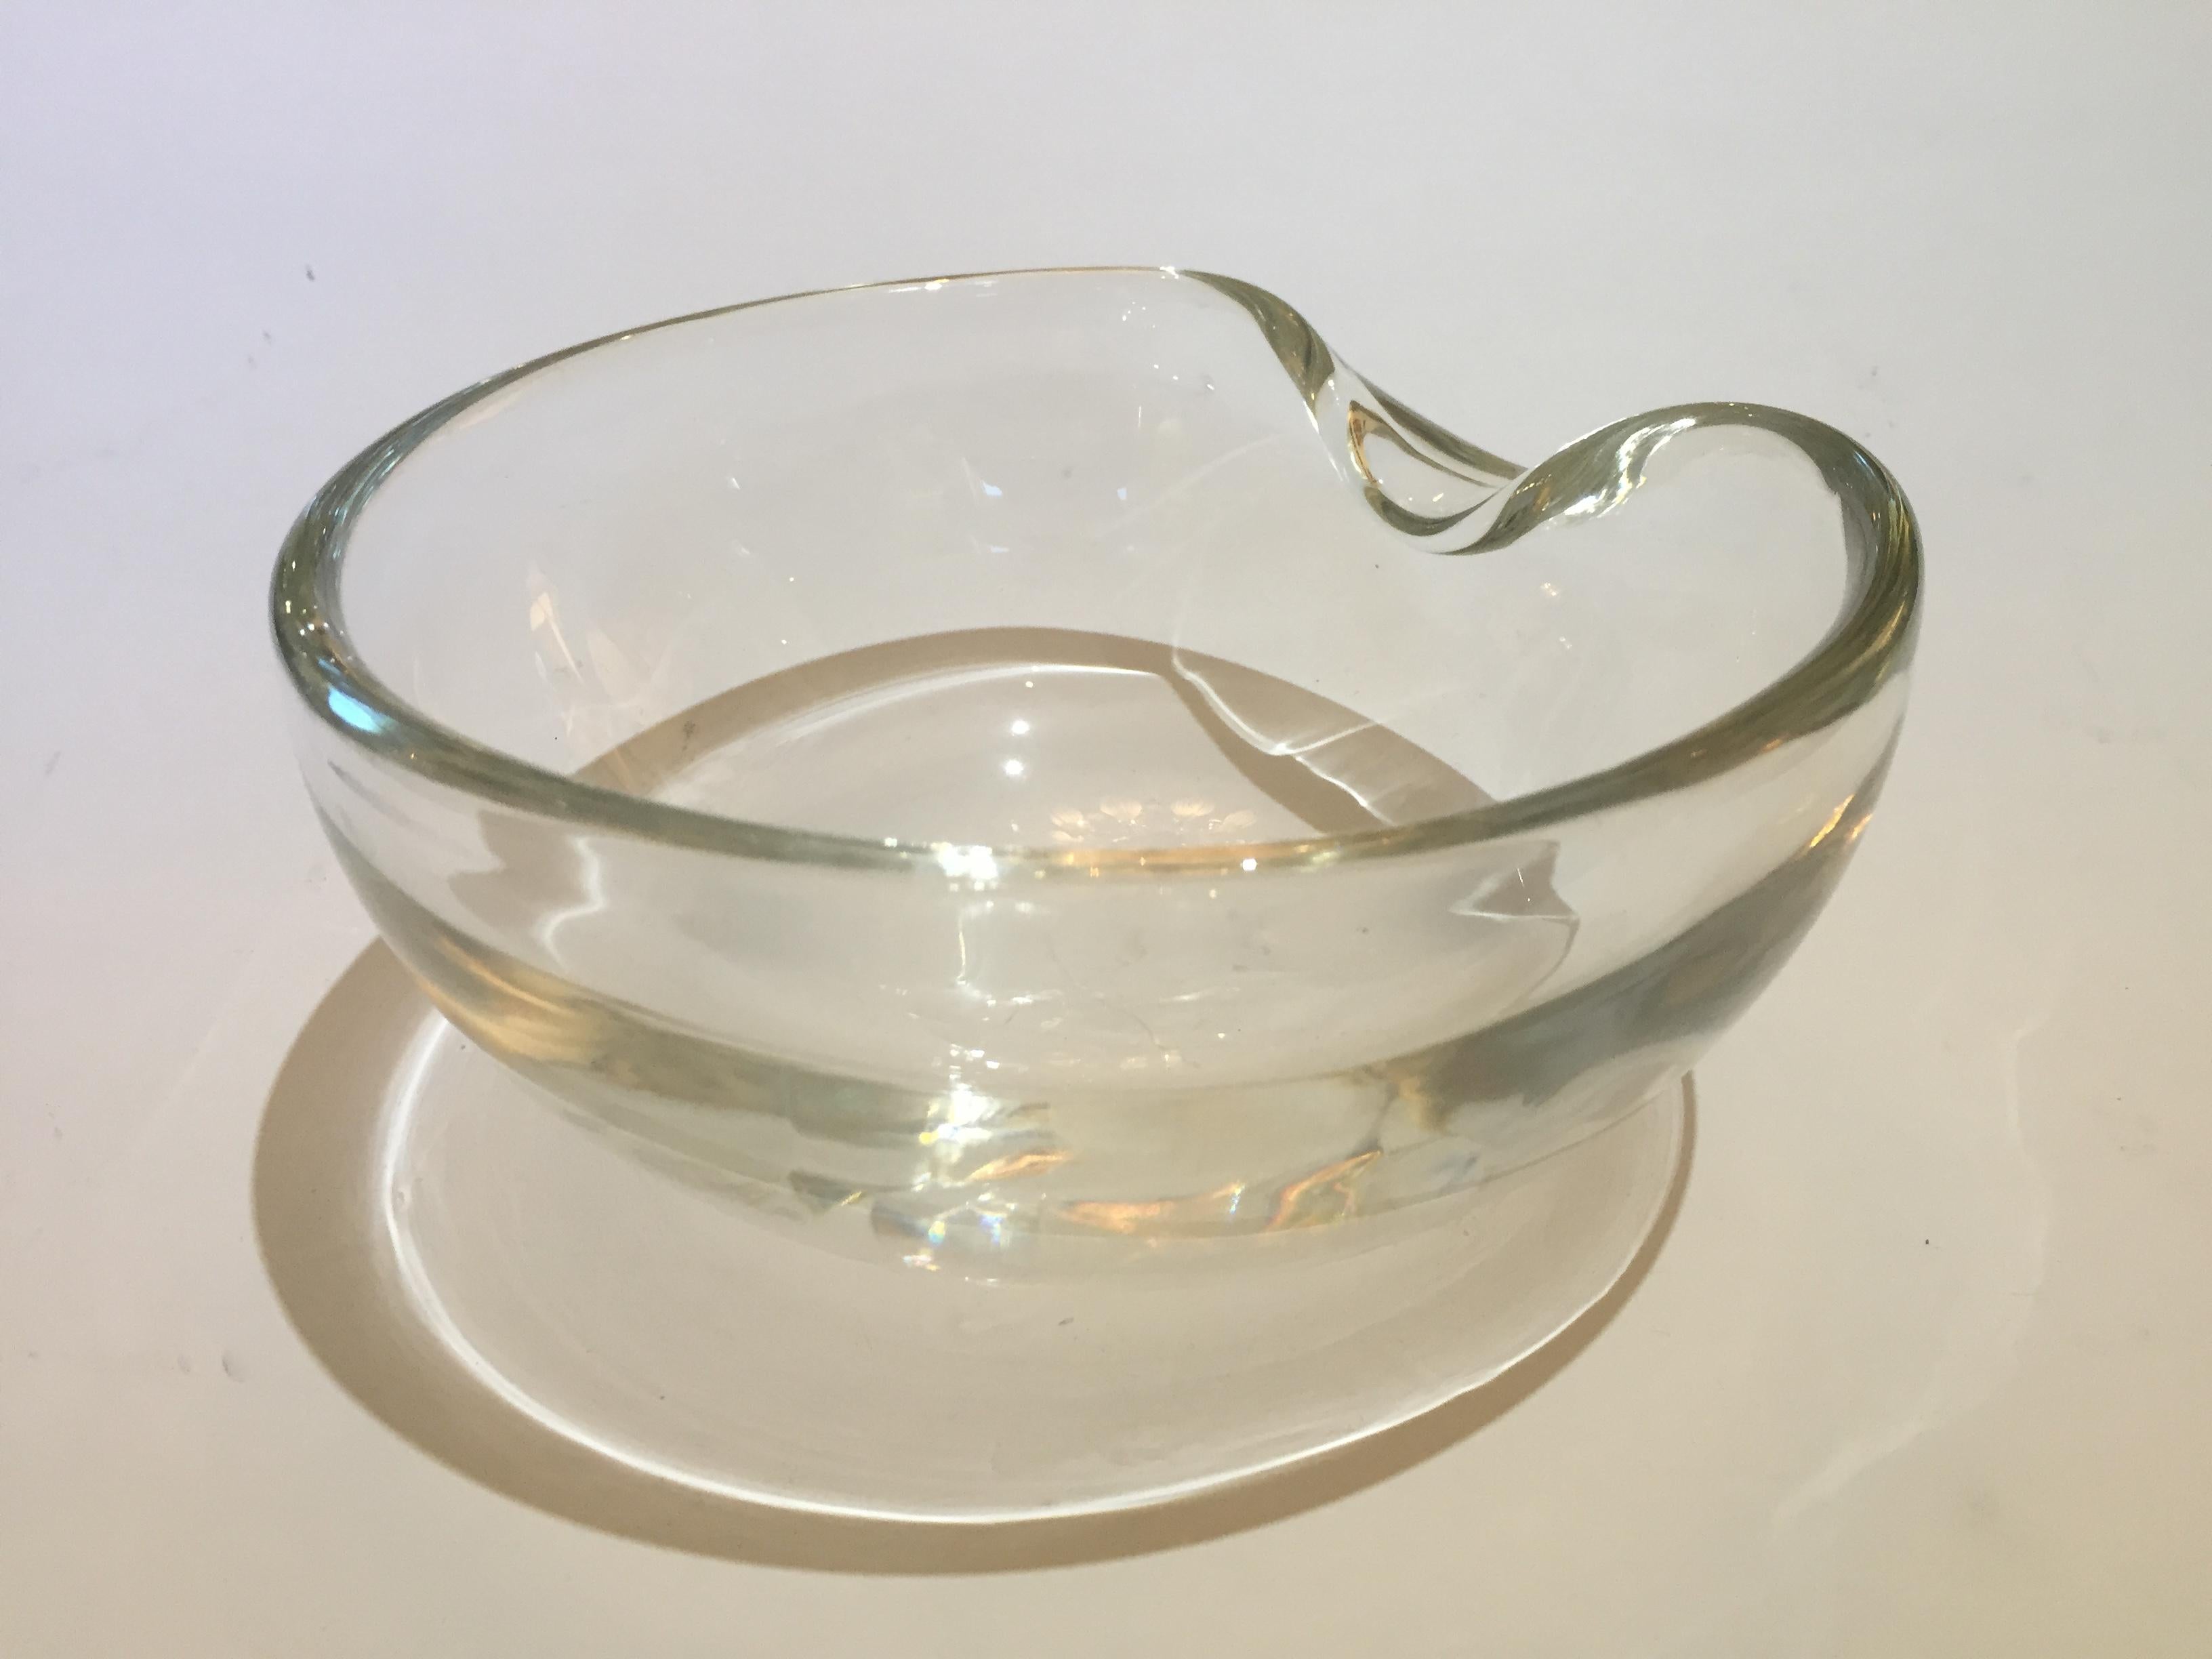 what is a thumbprint bowl used for